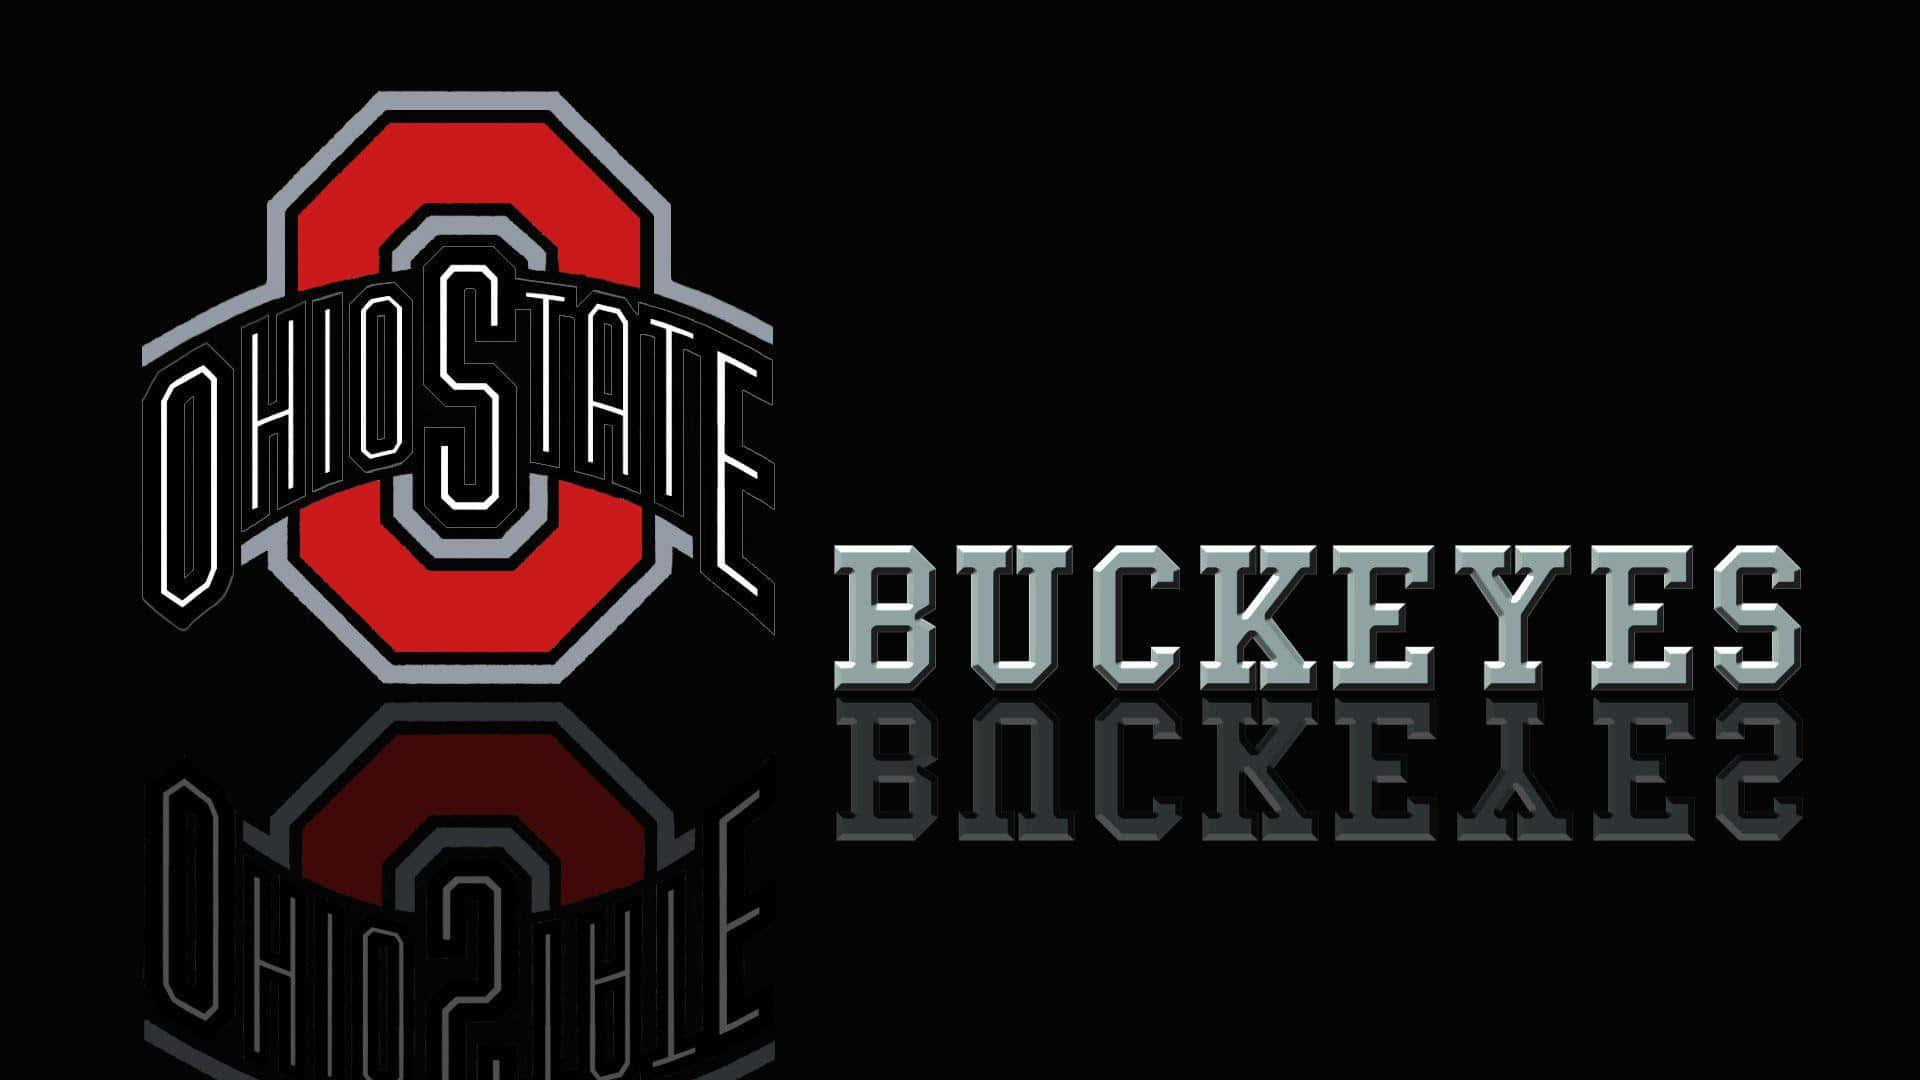 "Celebrate Ohio State Football with a Victory" Wallpaper